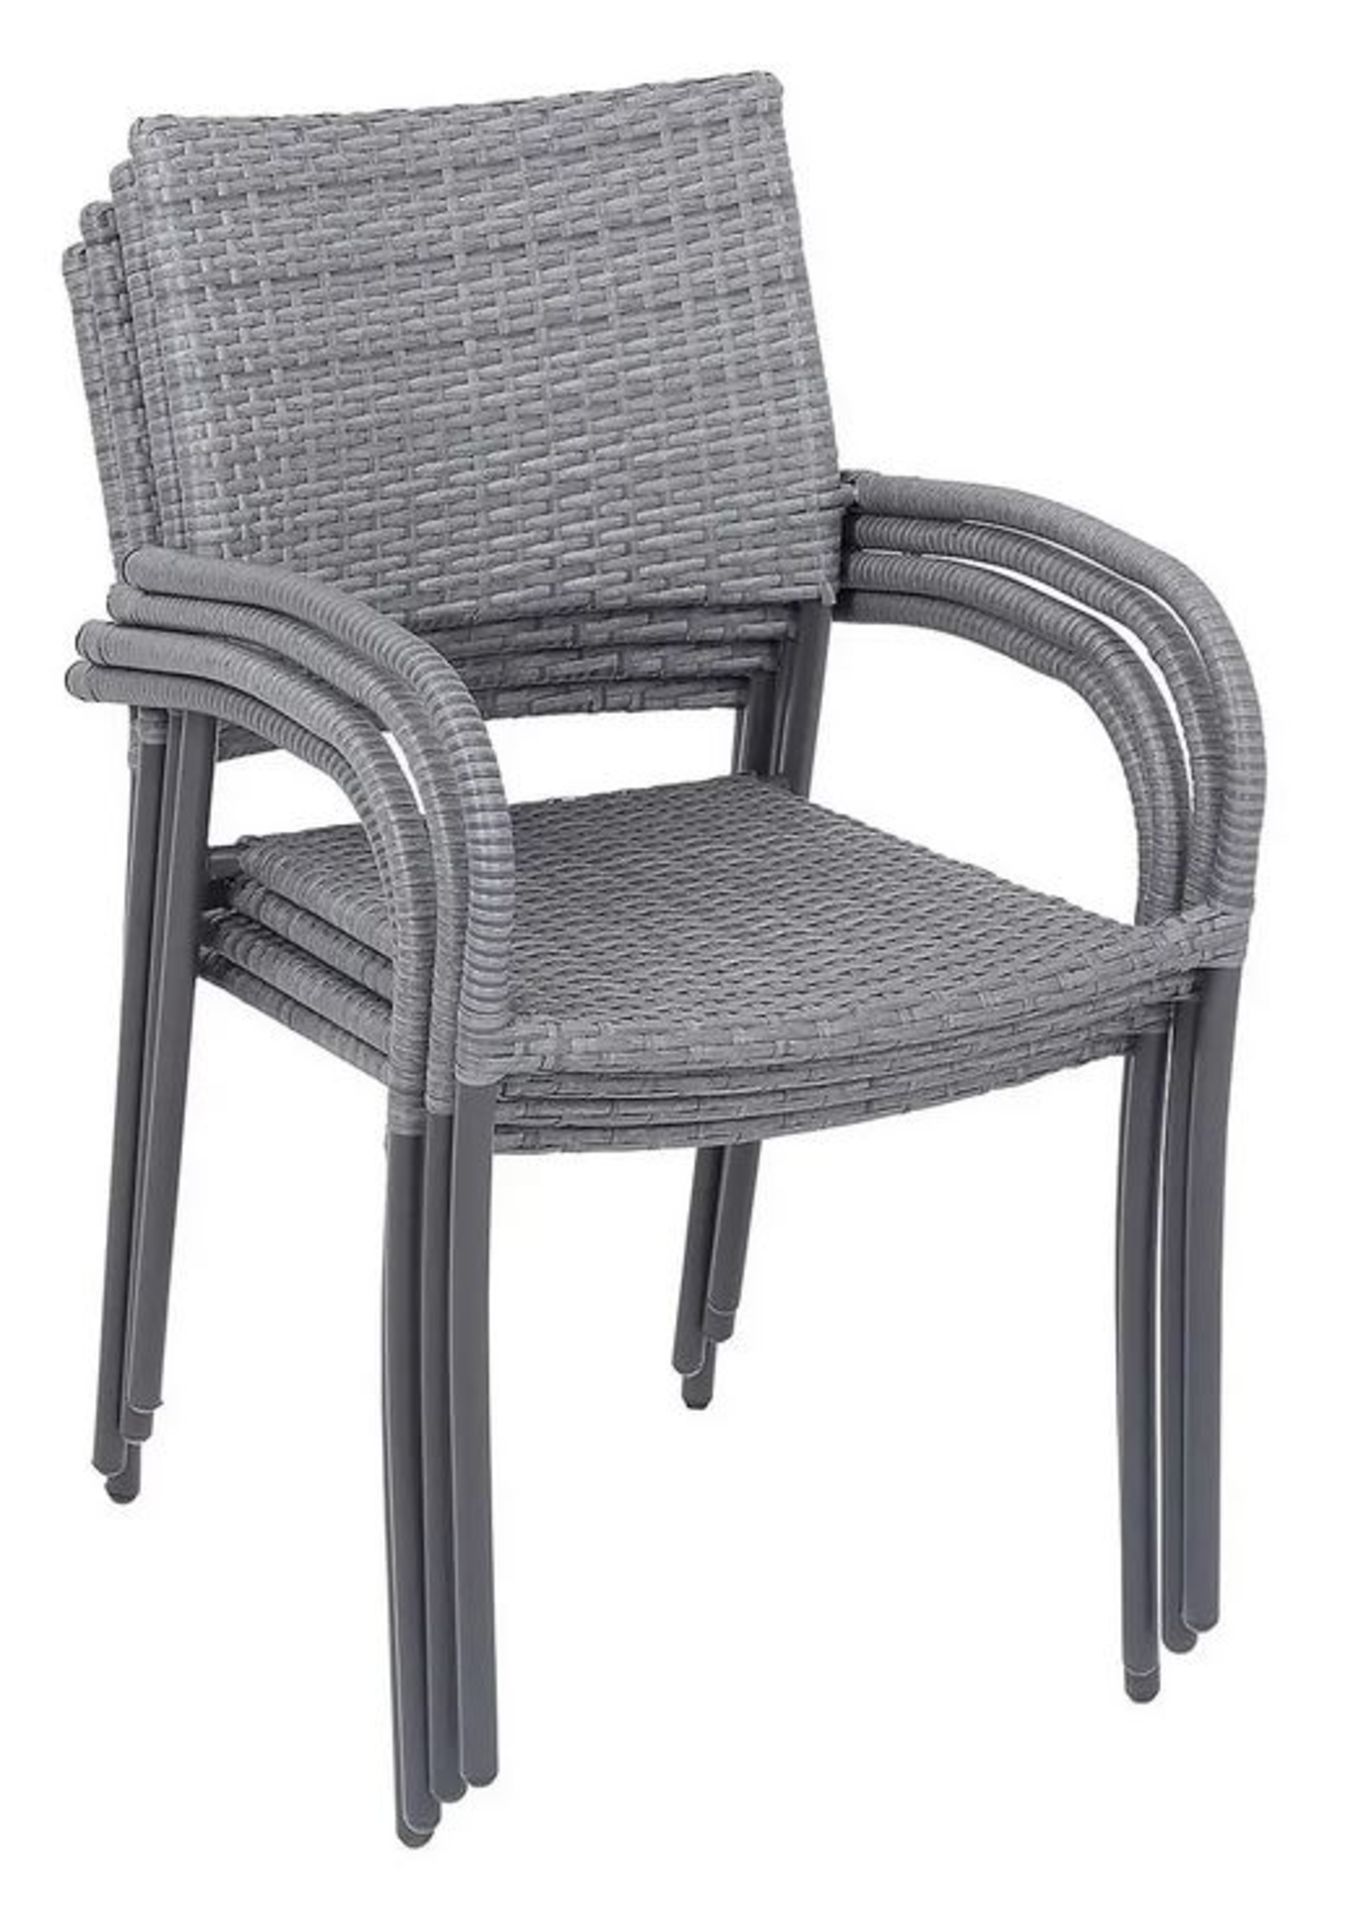 (16) 9x Bambrick Stacking Chair Grey. (H82x W52x D59cm). Powder Coated Steel Frame. Hand Woven Synt - Image 3 of 4